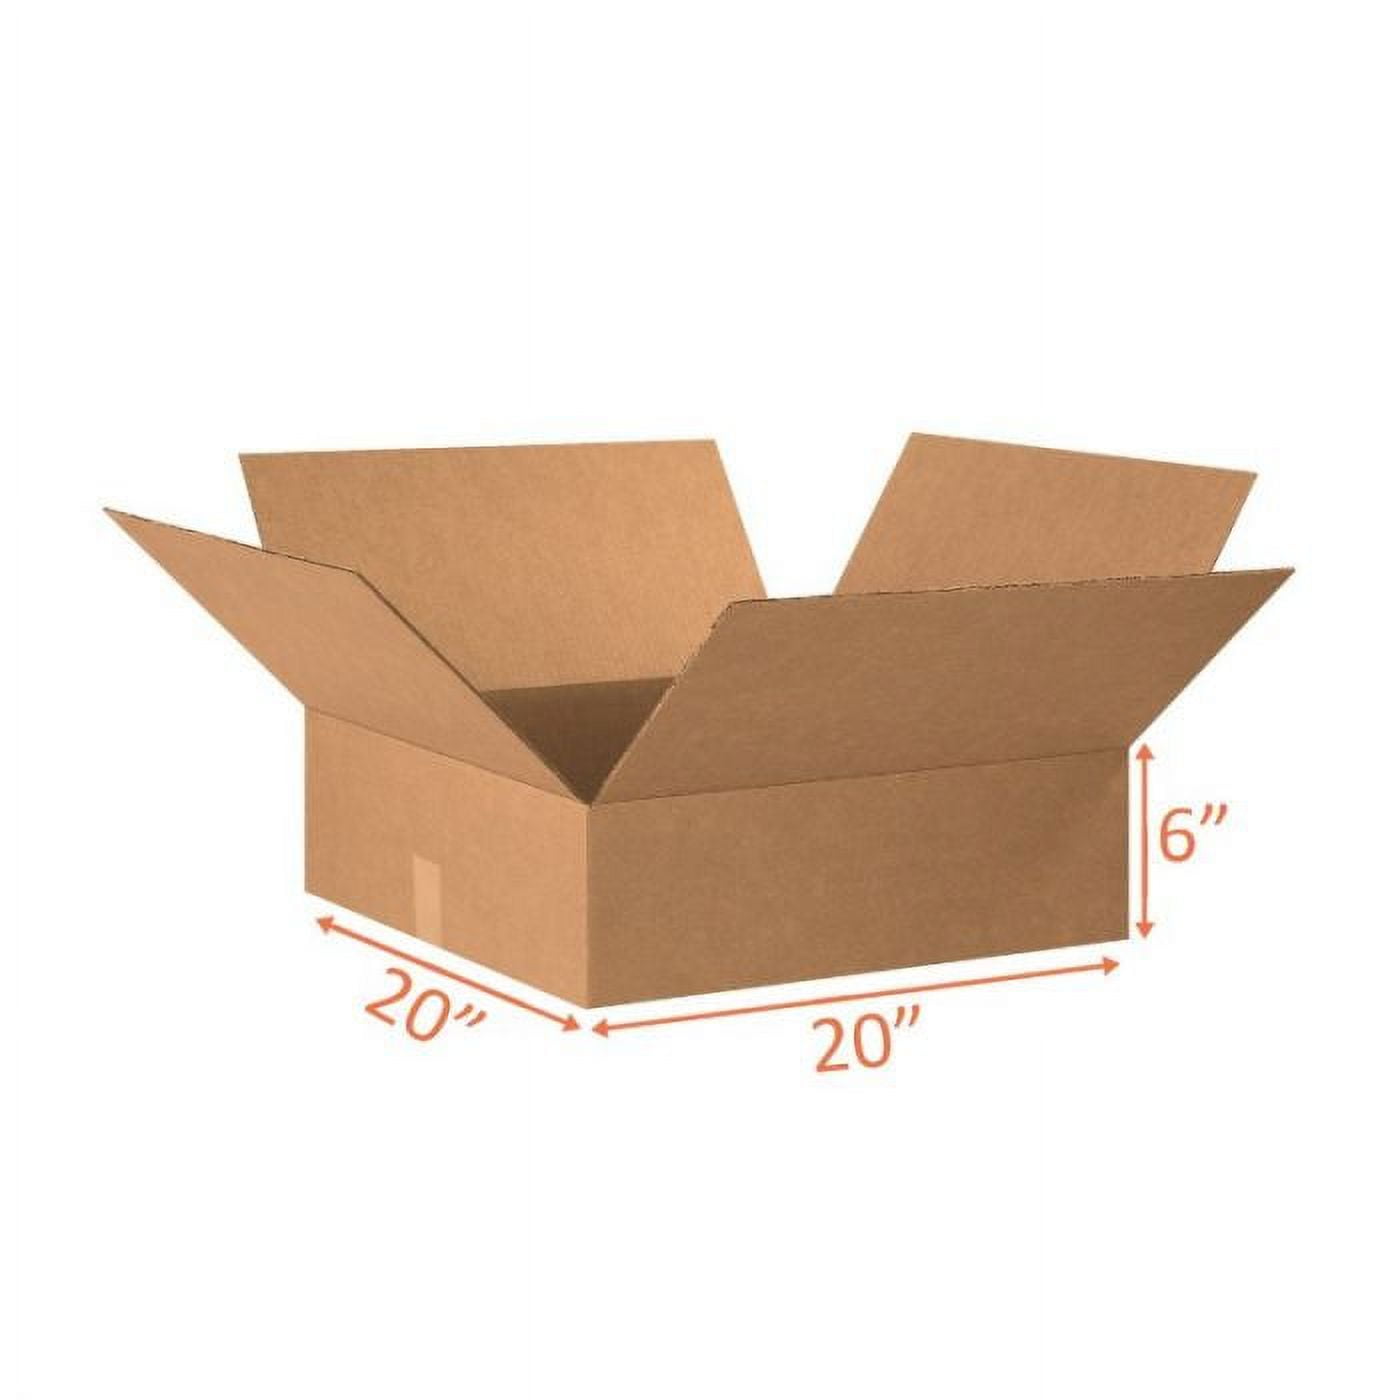 (3 Pack) 20x20x6 Size Shipping and Packing Box - Cardboard - Quantity ...